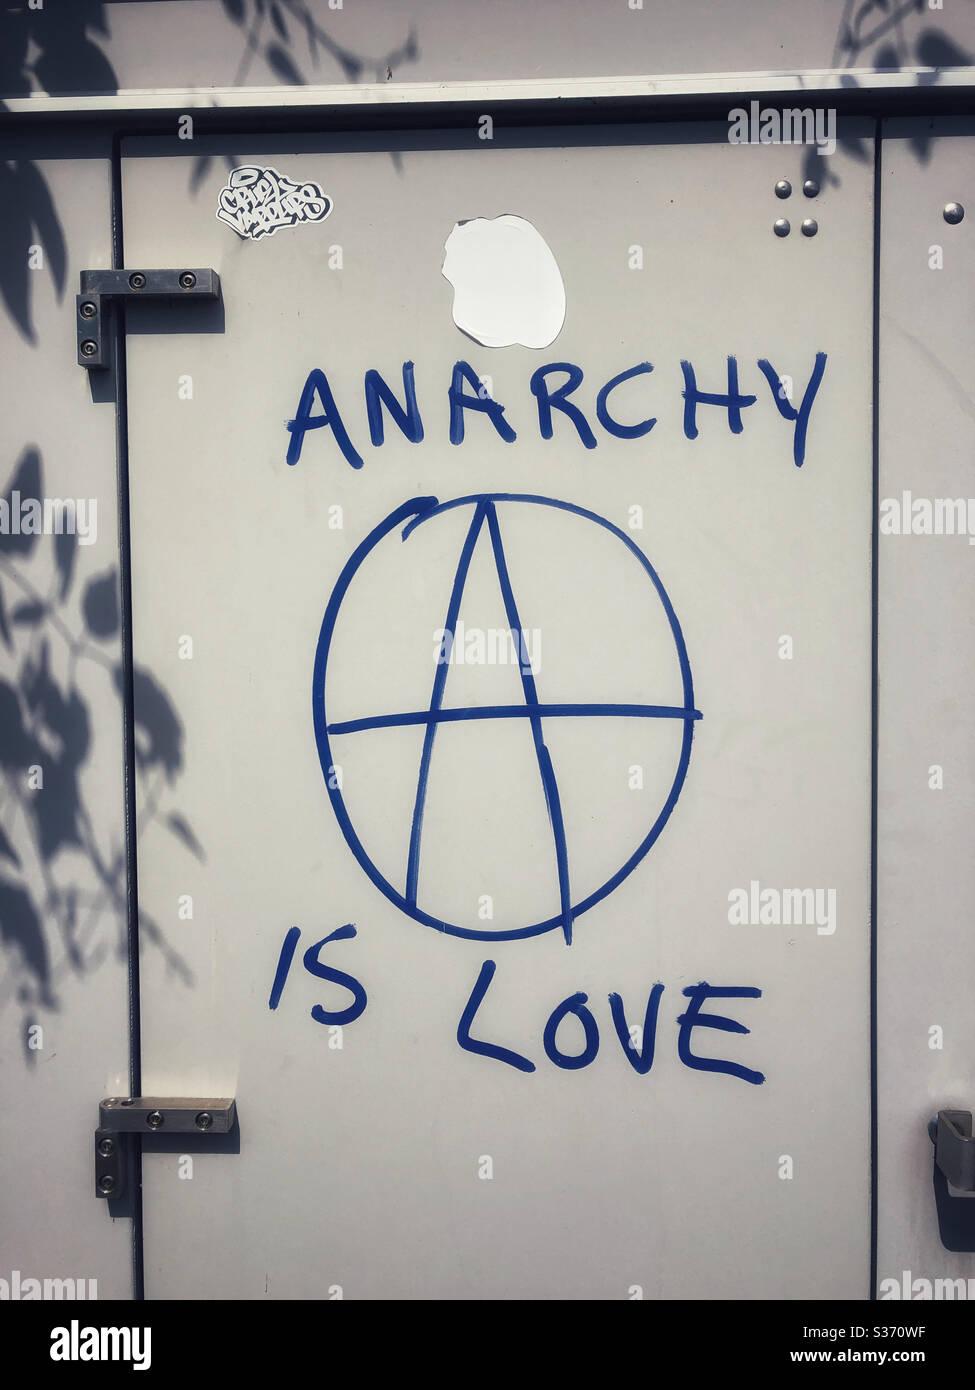 Graffiti on a wall -Anarchy is love Stock Photo